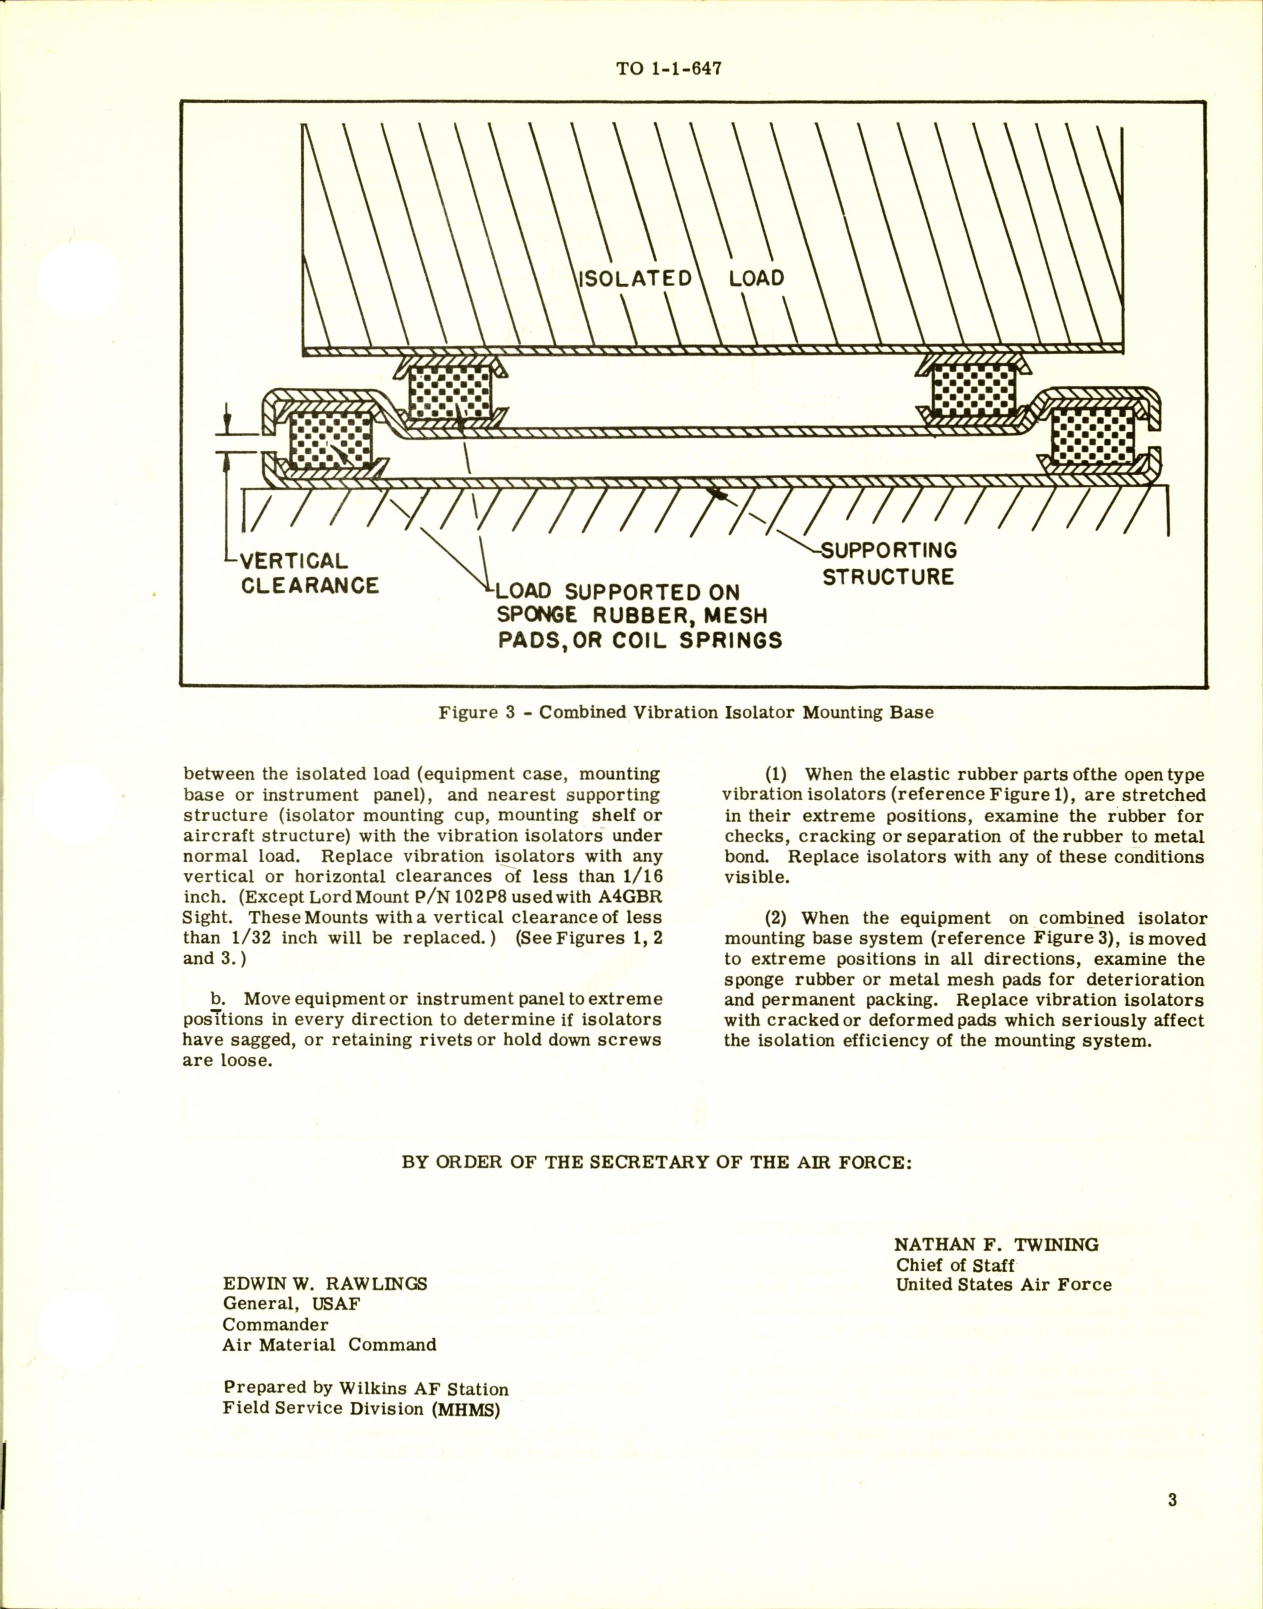 Sample page 3 from AirCorps Library document: Inspection Test and Replacement of Vibration Isolators on Equipment